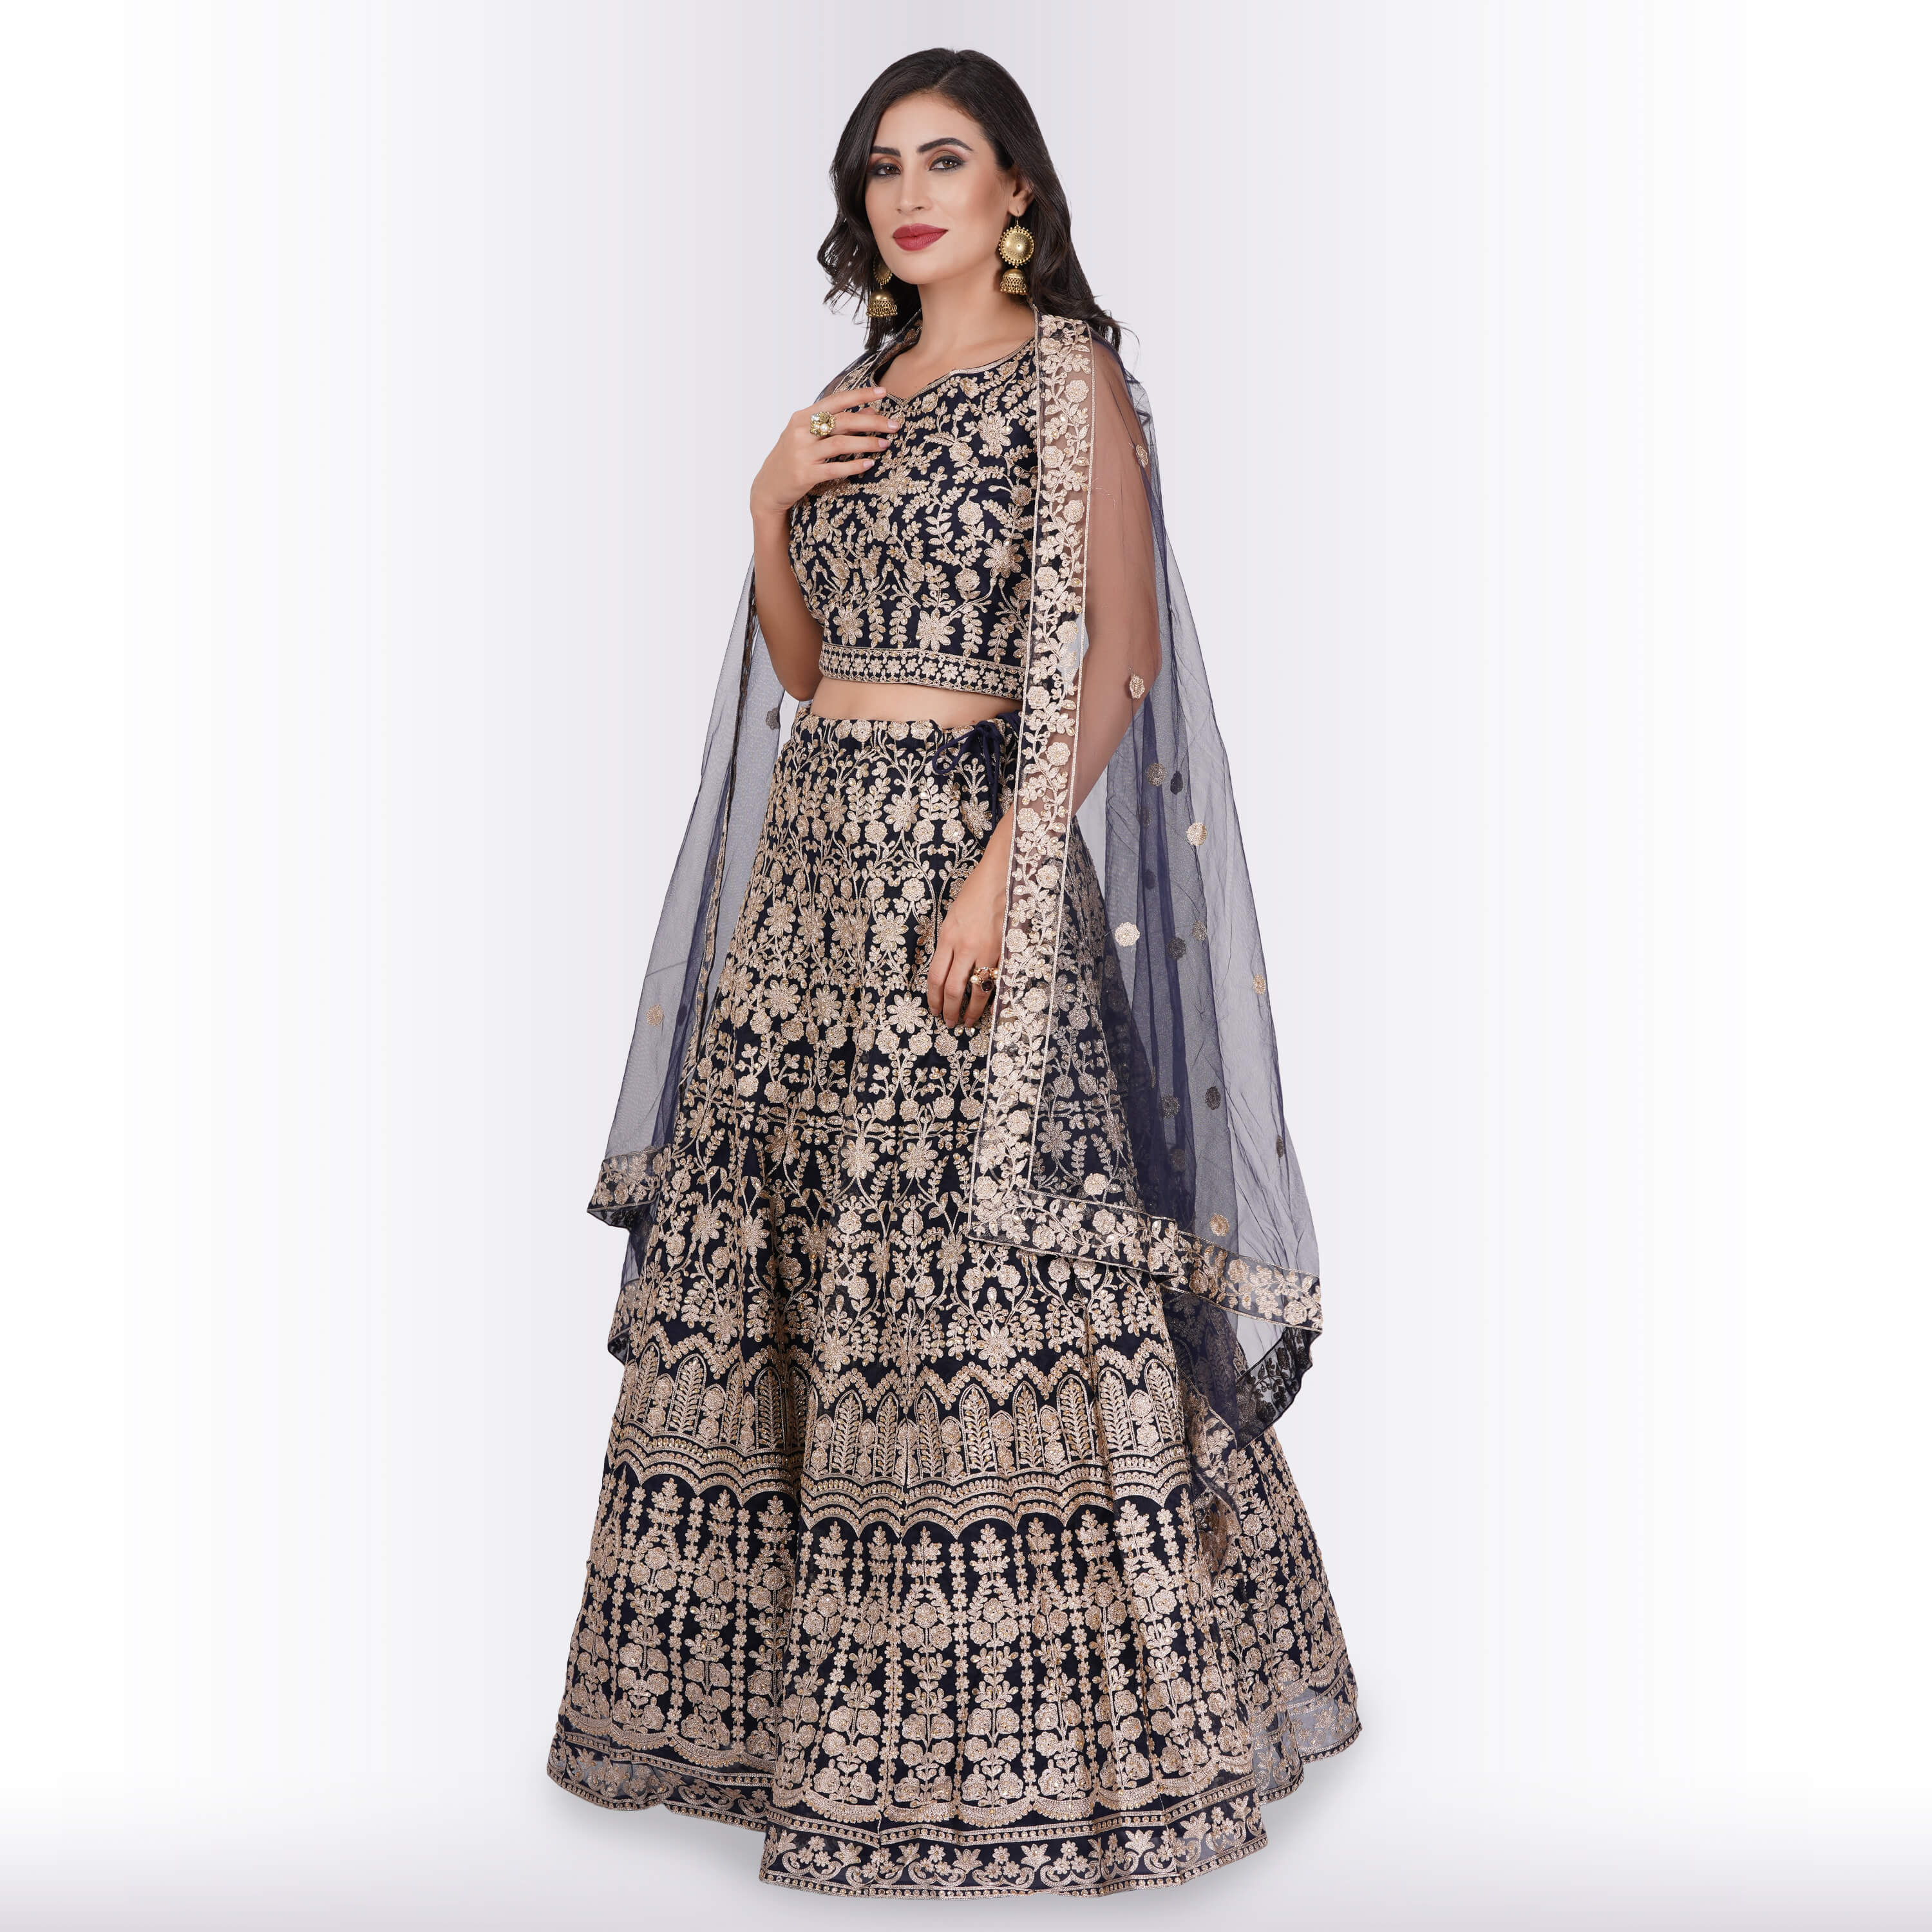 Search results for: 'under rama print 1000 lehenga'